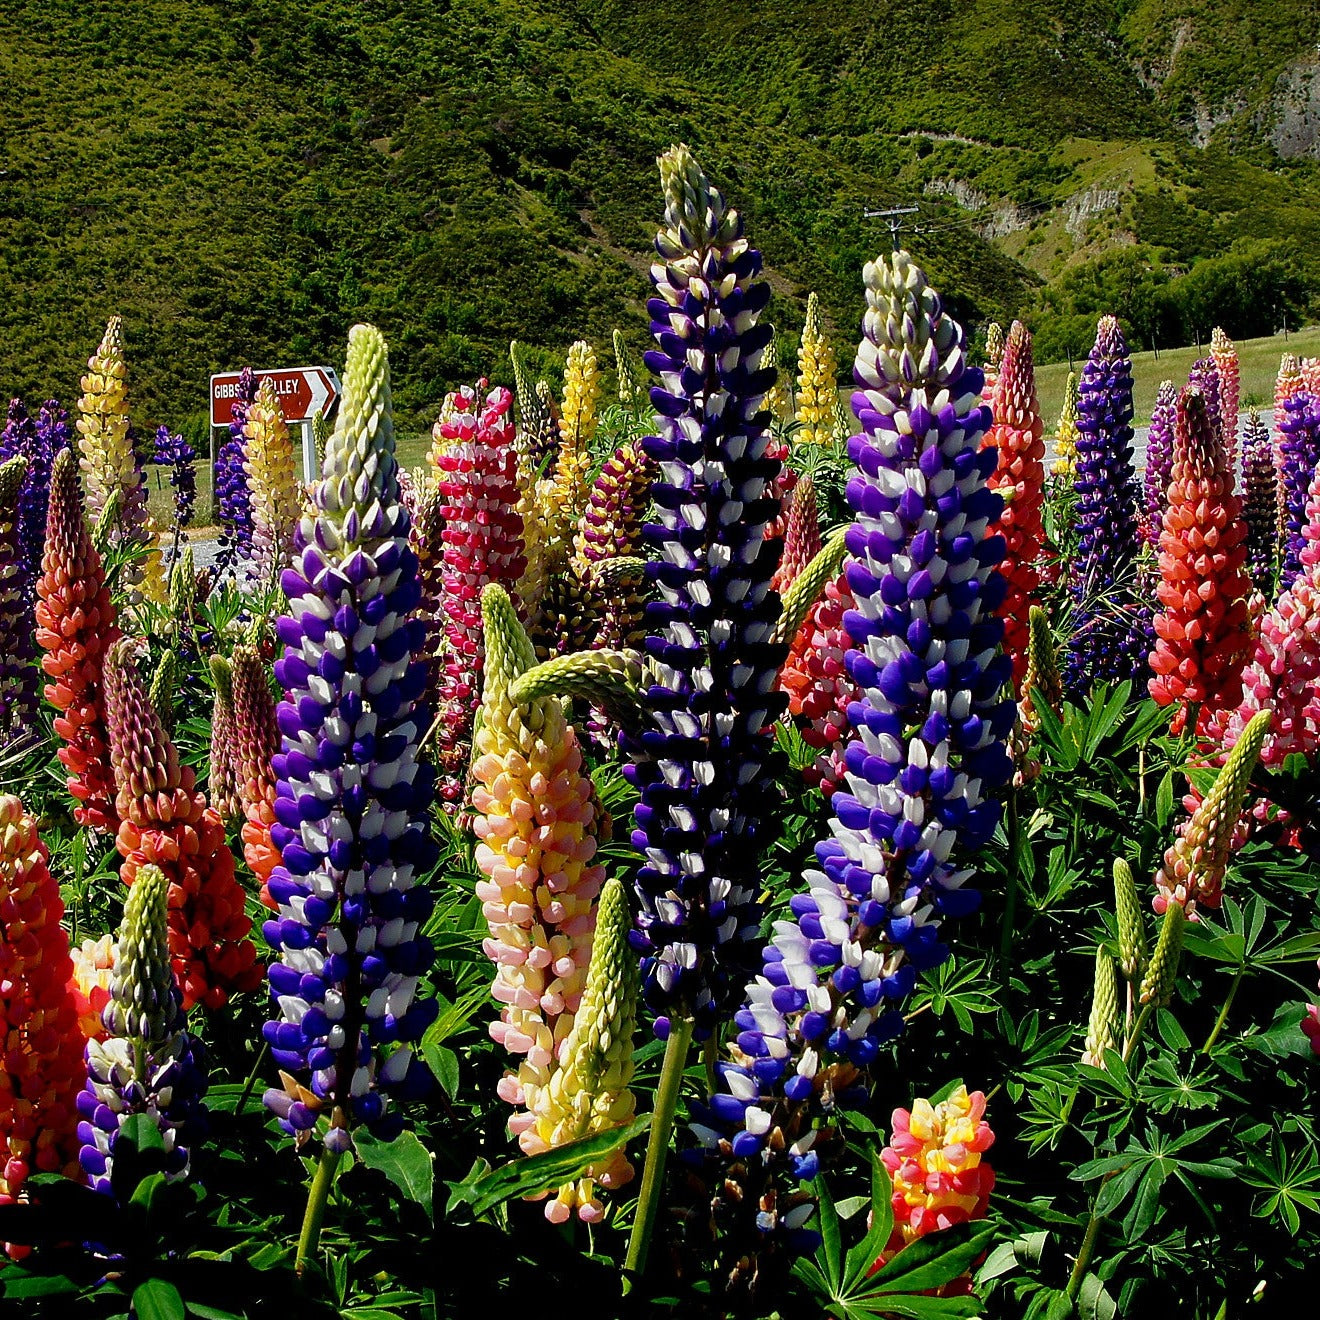 Russell’s Hybrids Mix Lupins